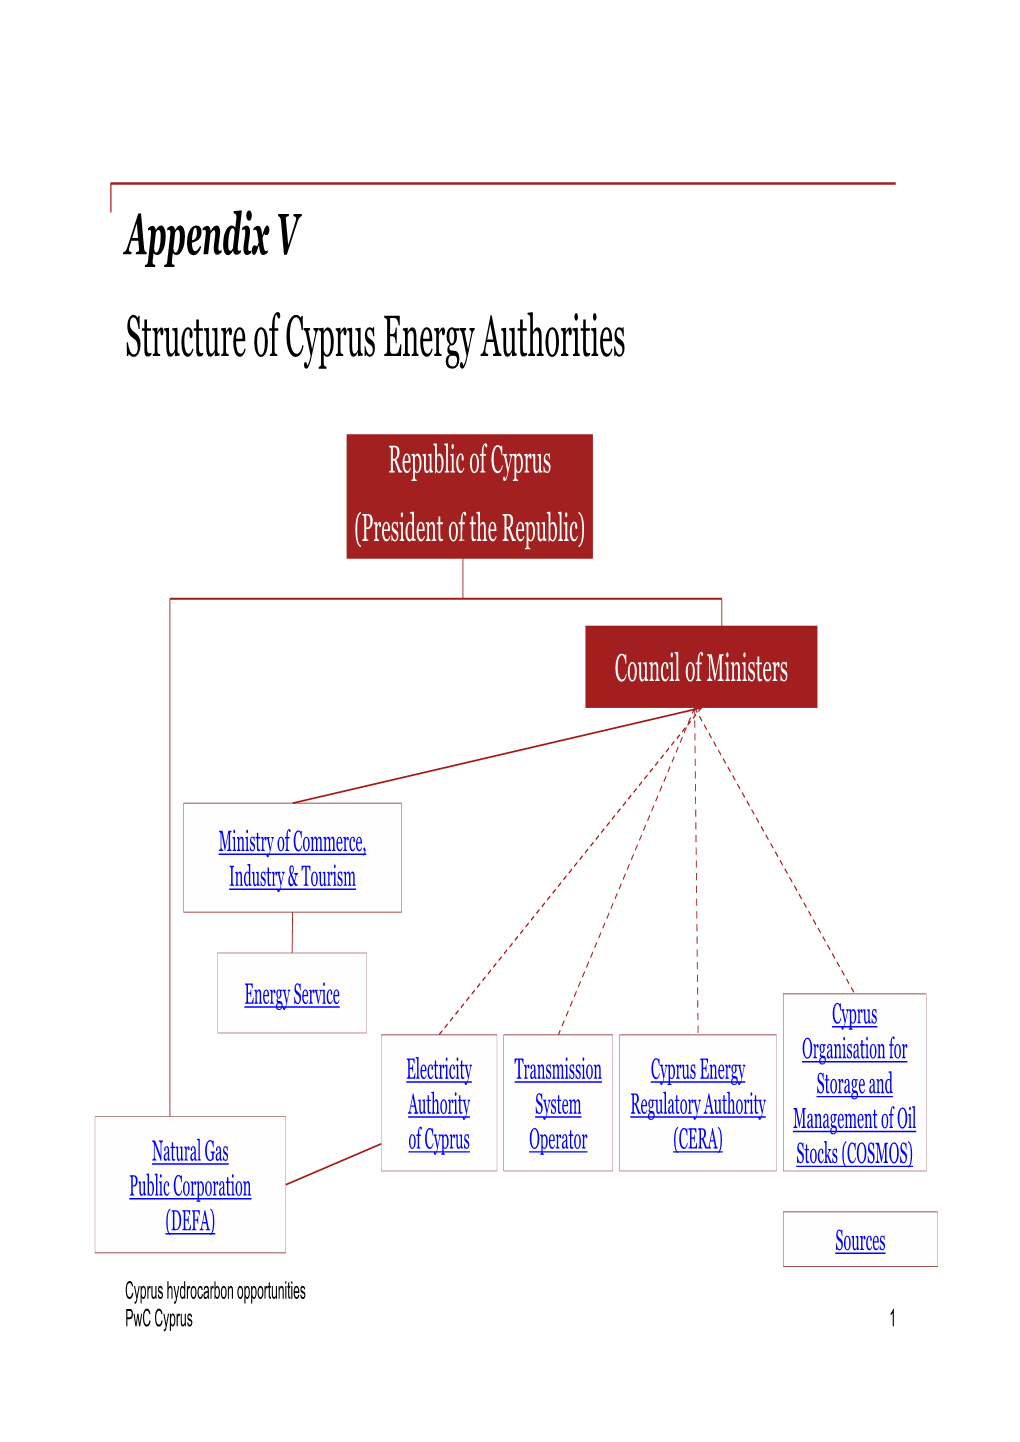 Appendix V Structure of Cyprus Energy Authorities